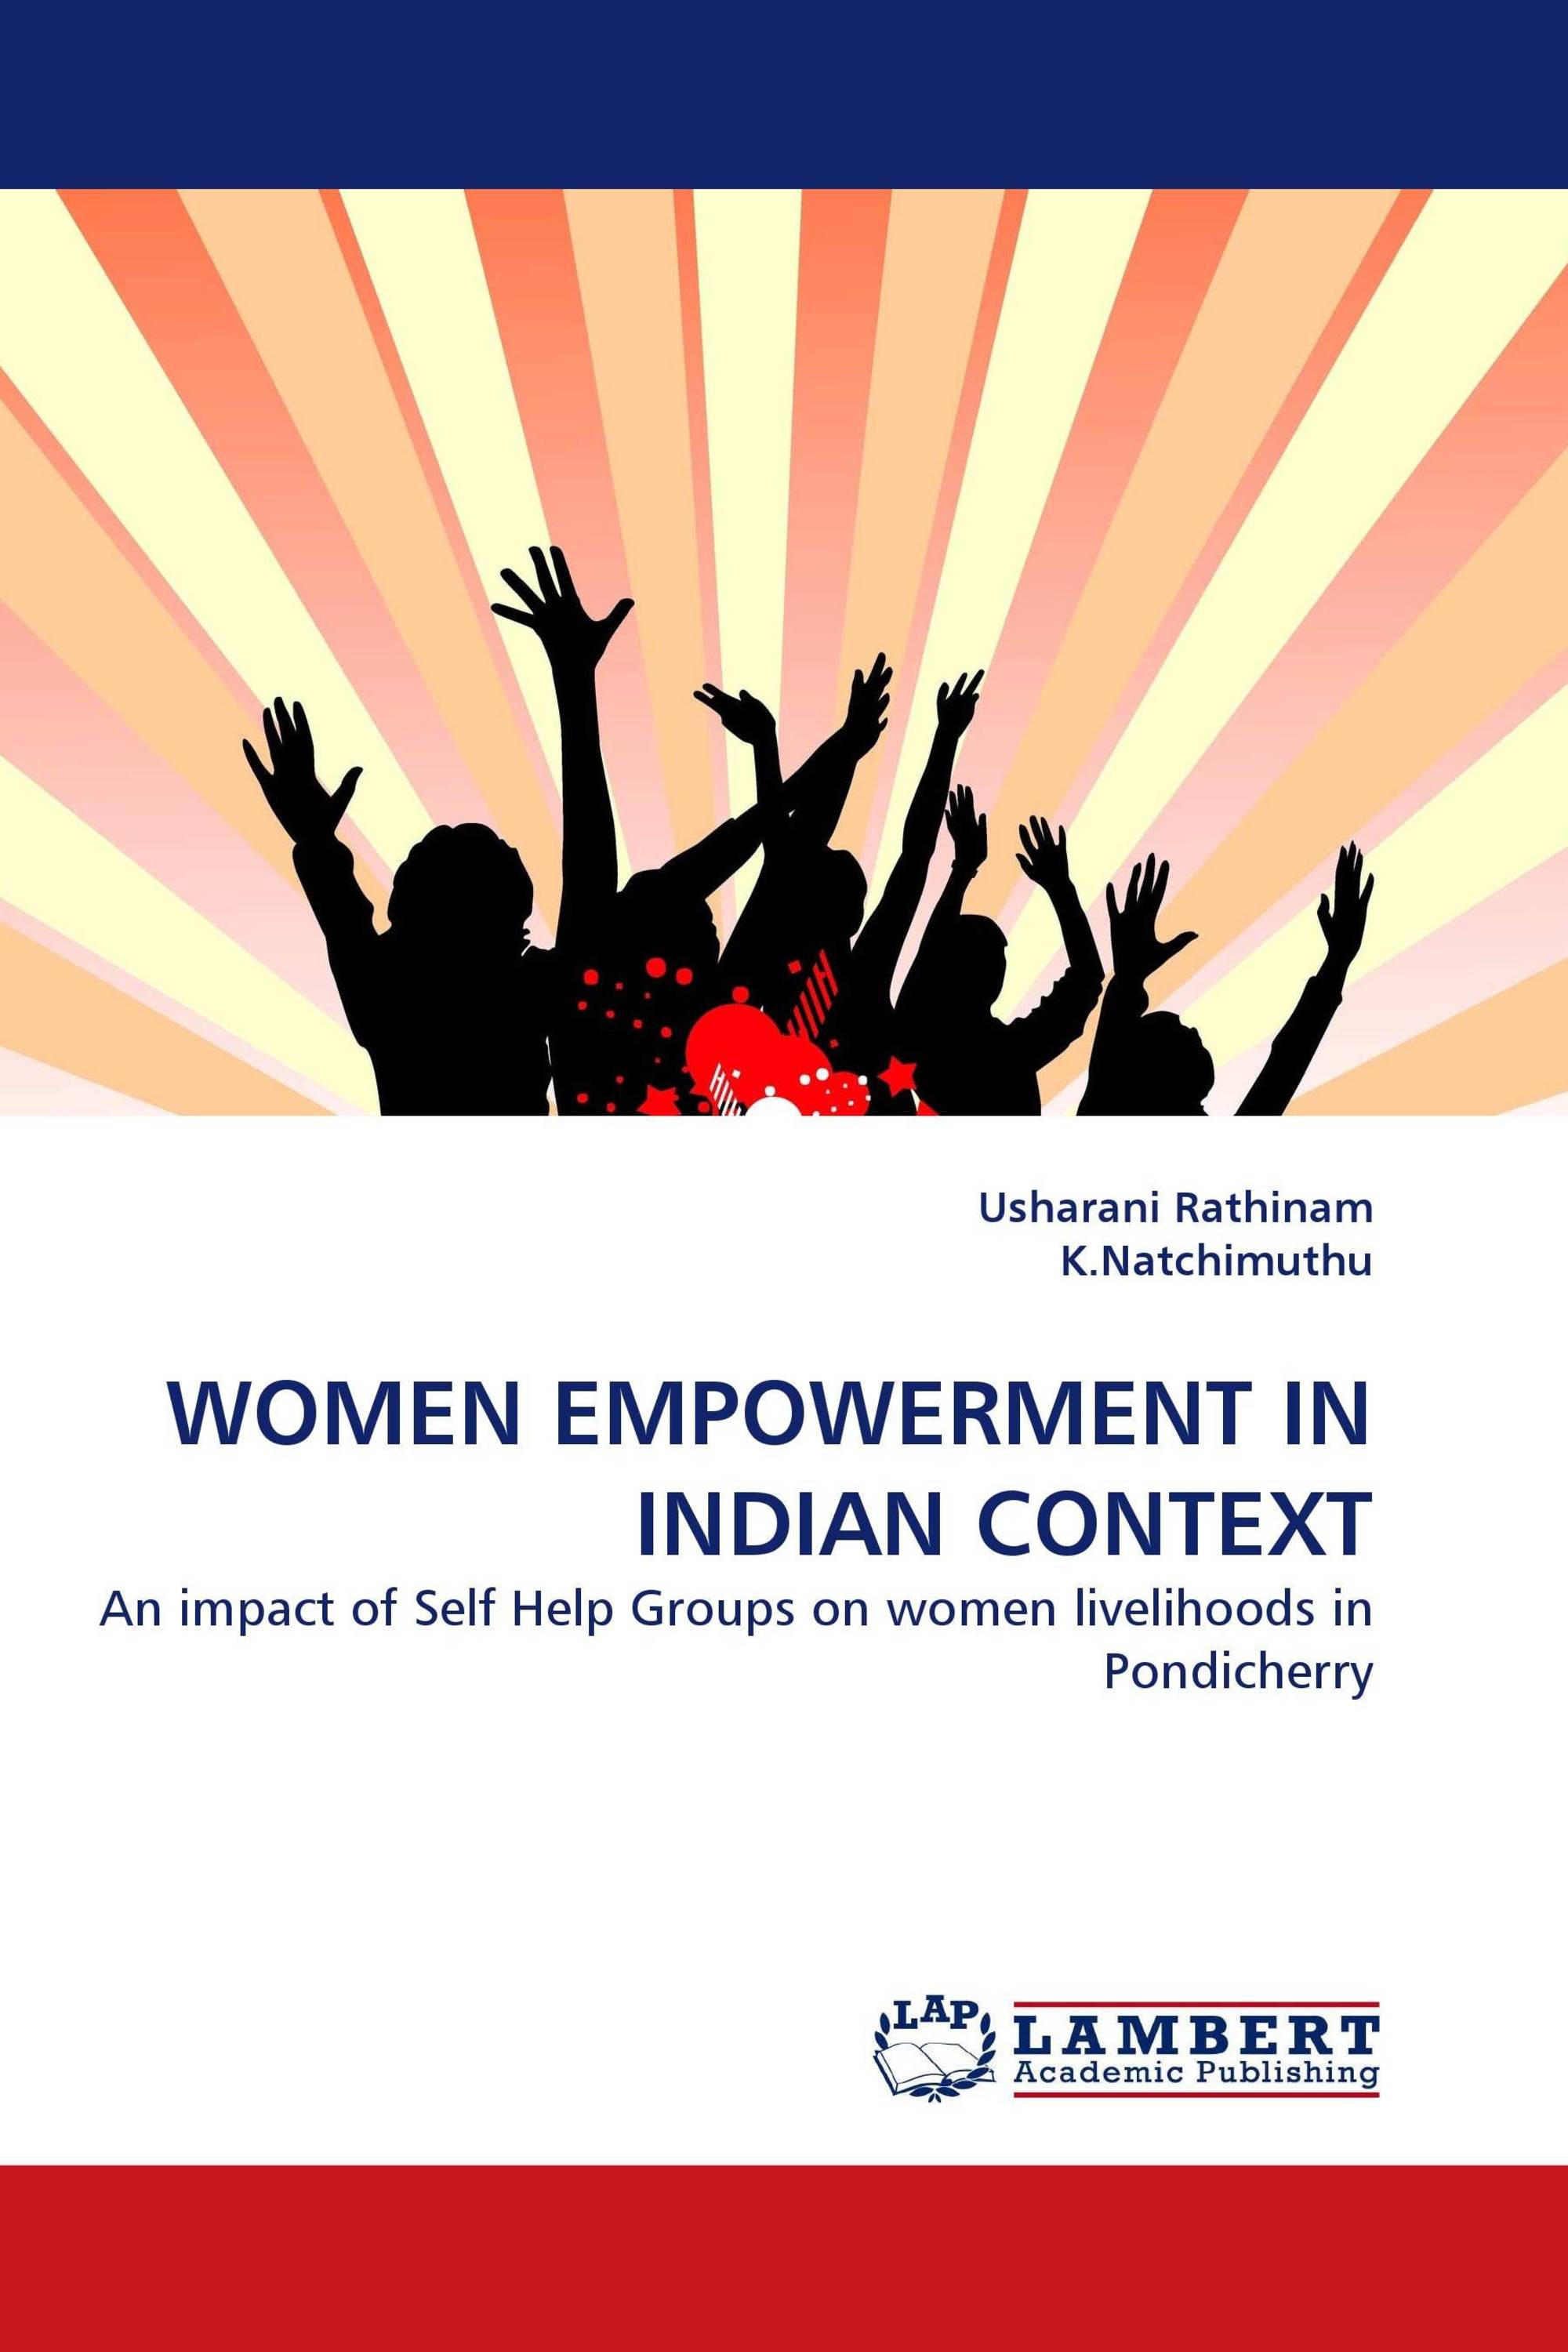 Essay on women empowerment in india